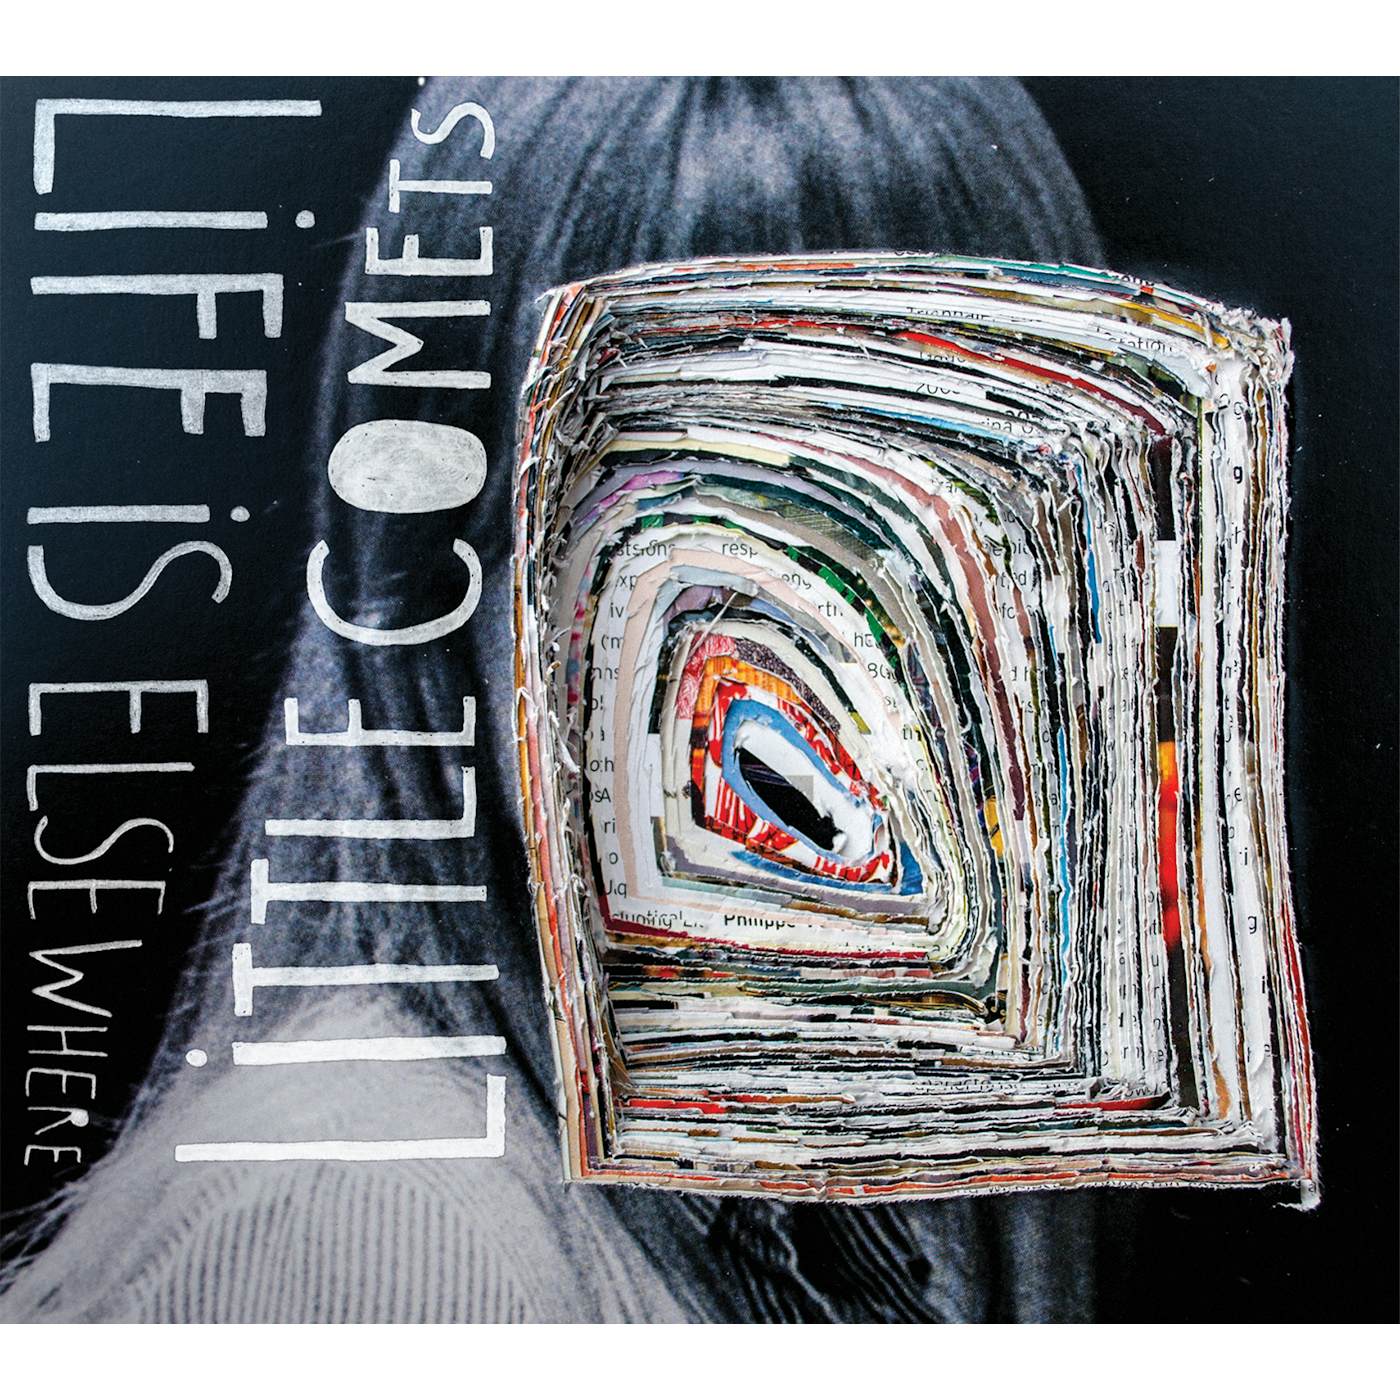 Little Comets LIFE IS ELSEWHERE CD